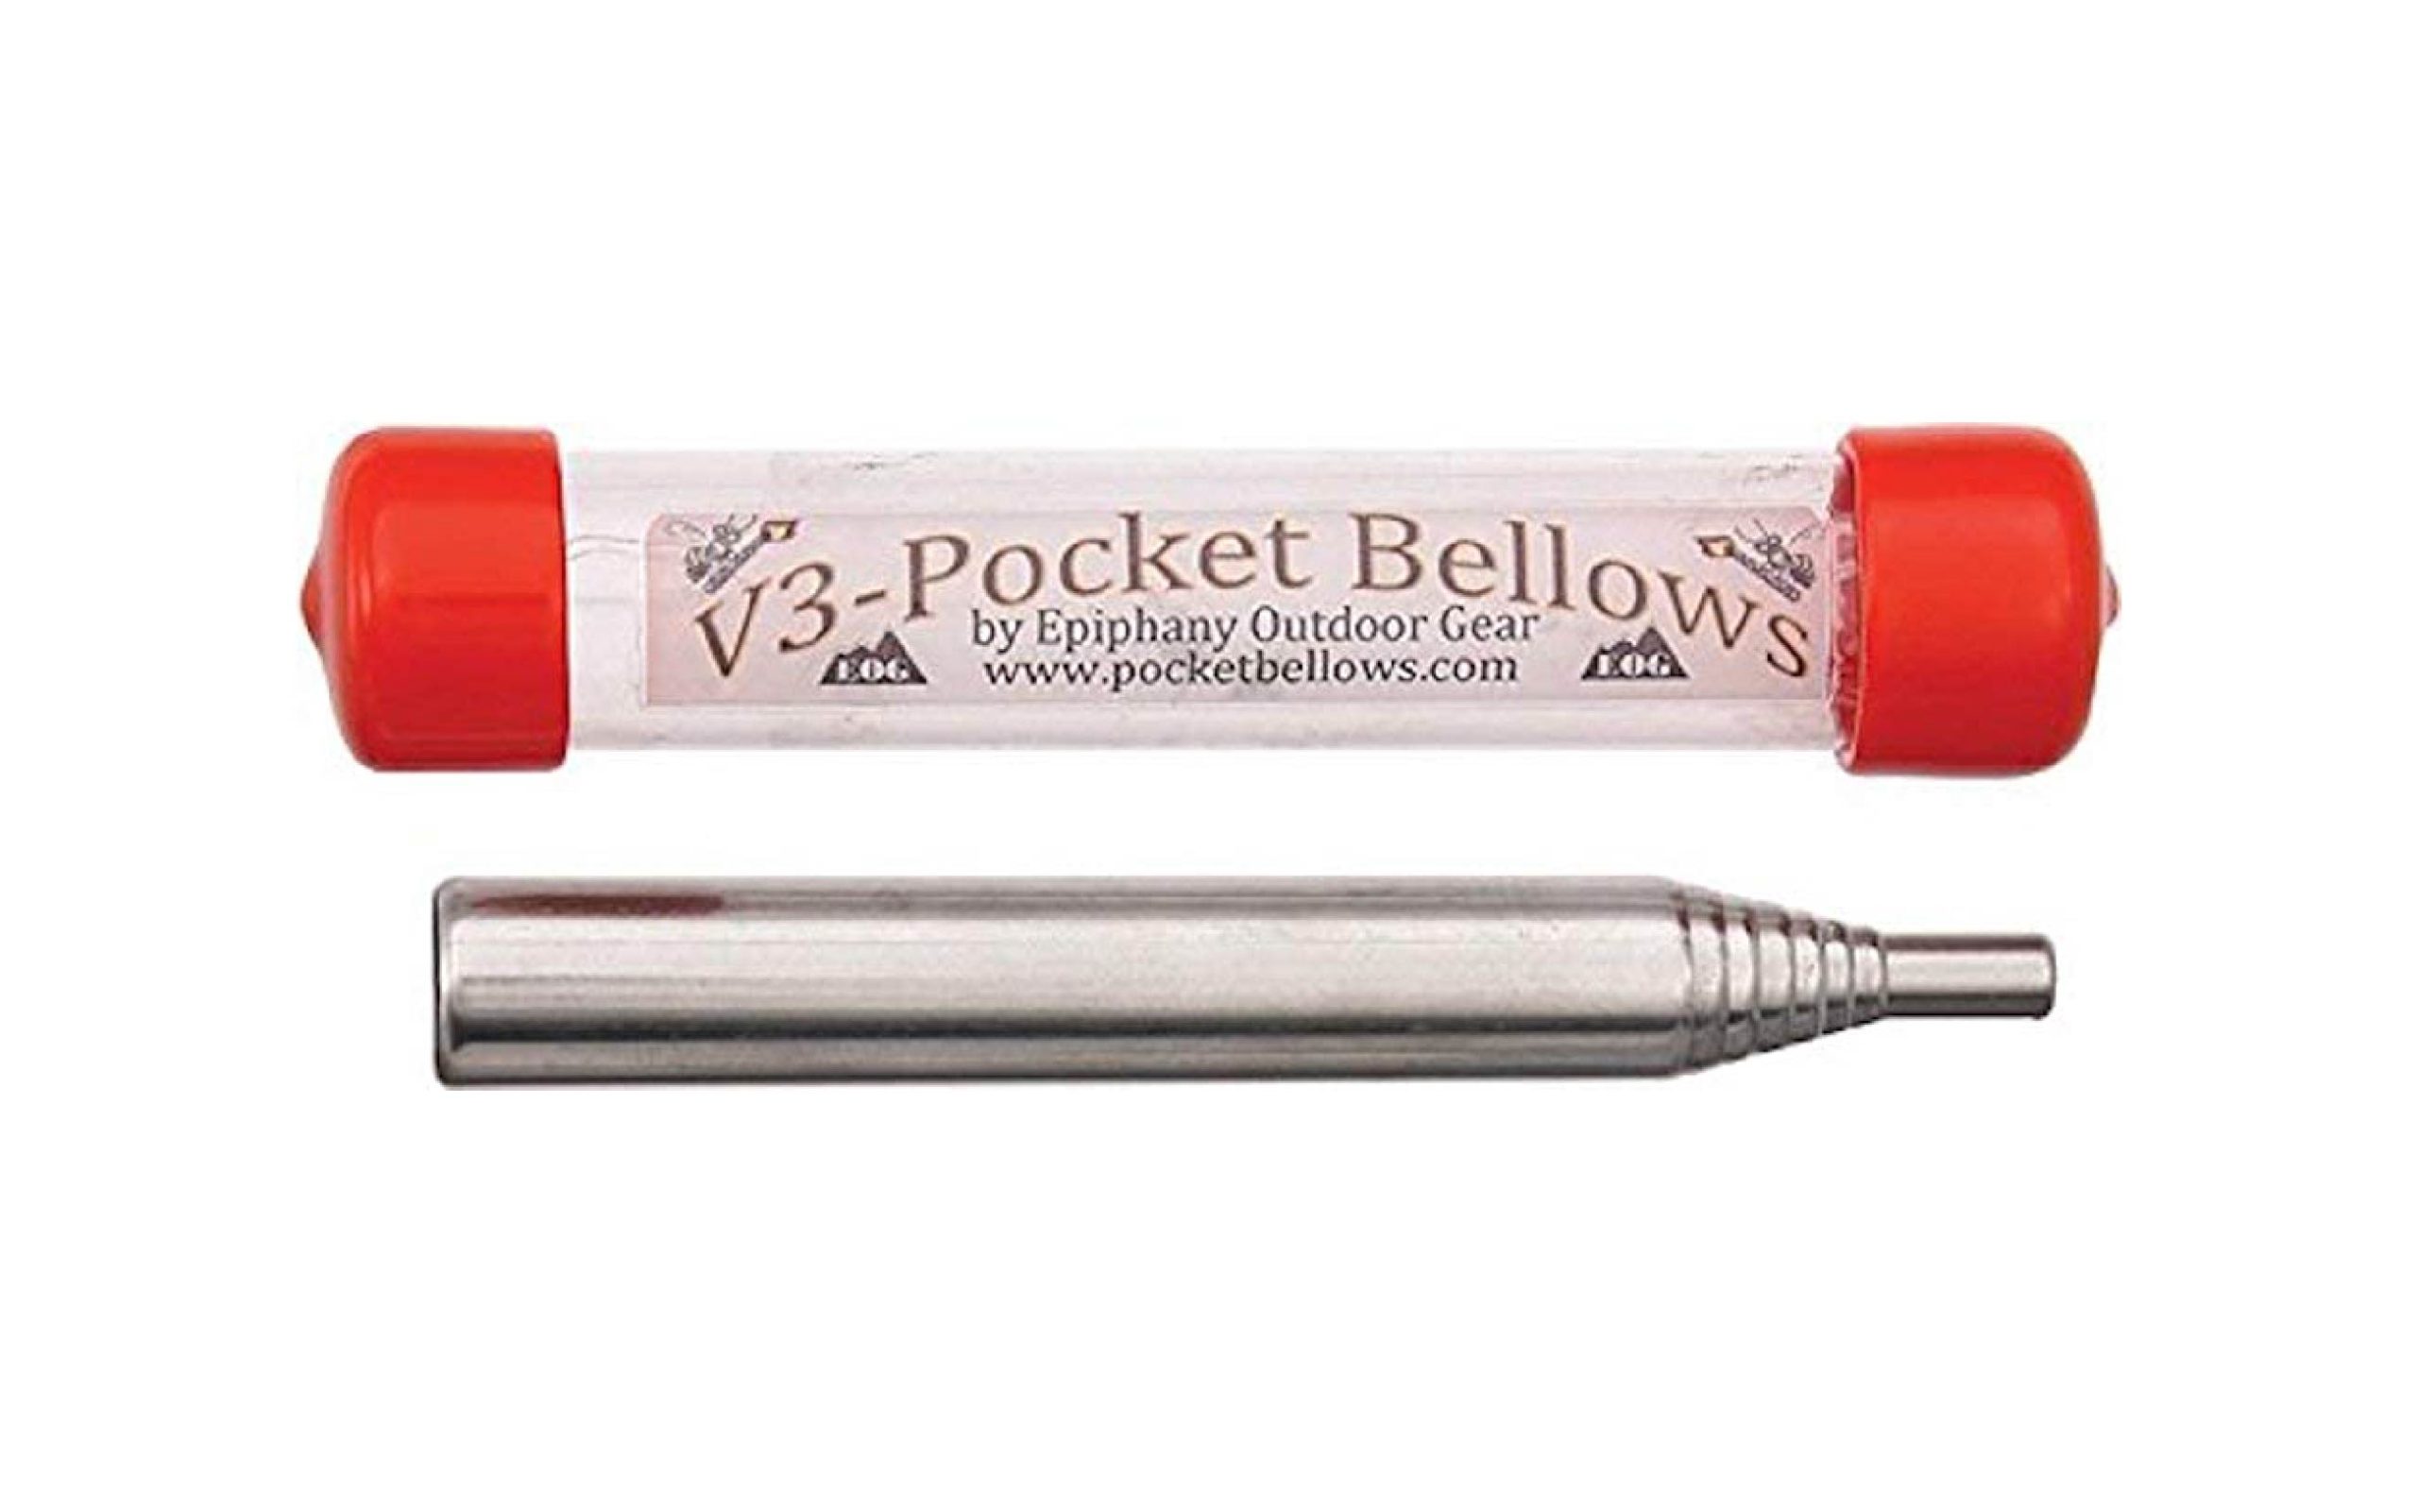 What is a pocket bellow used for